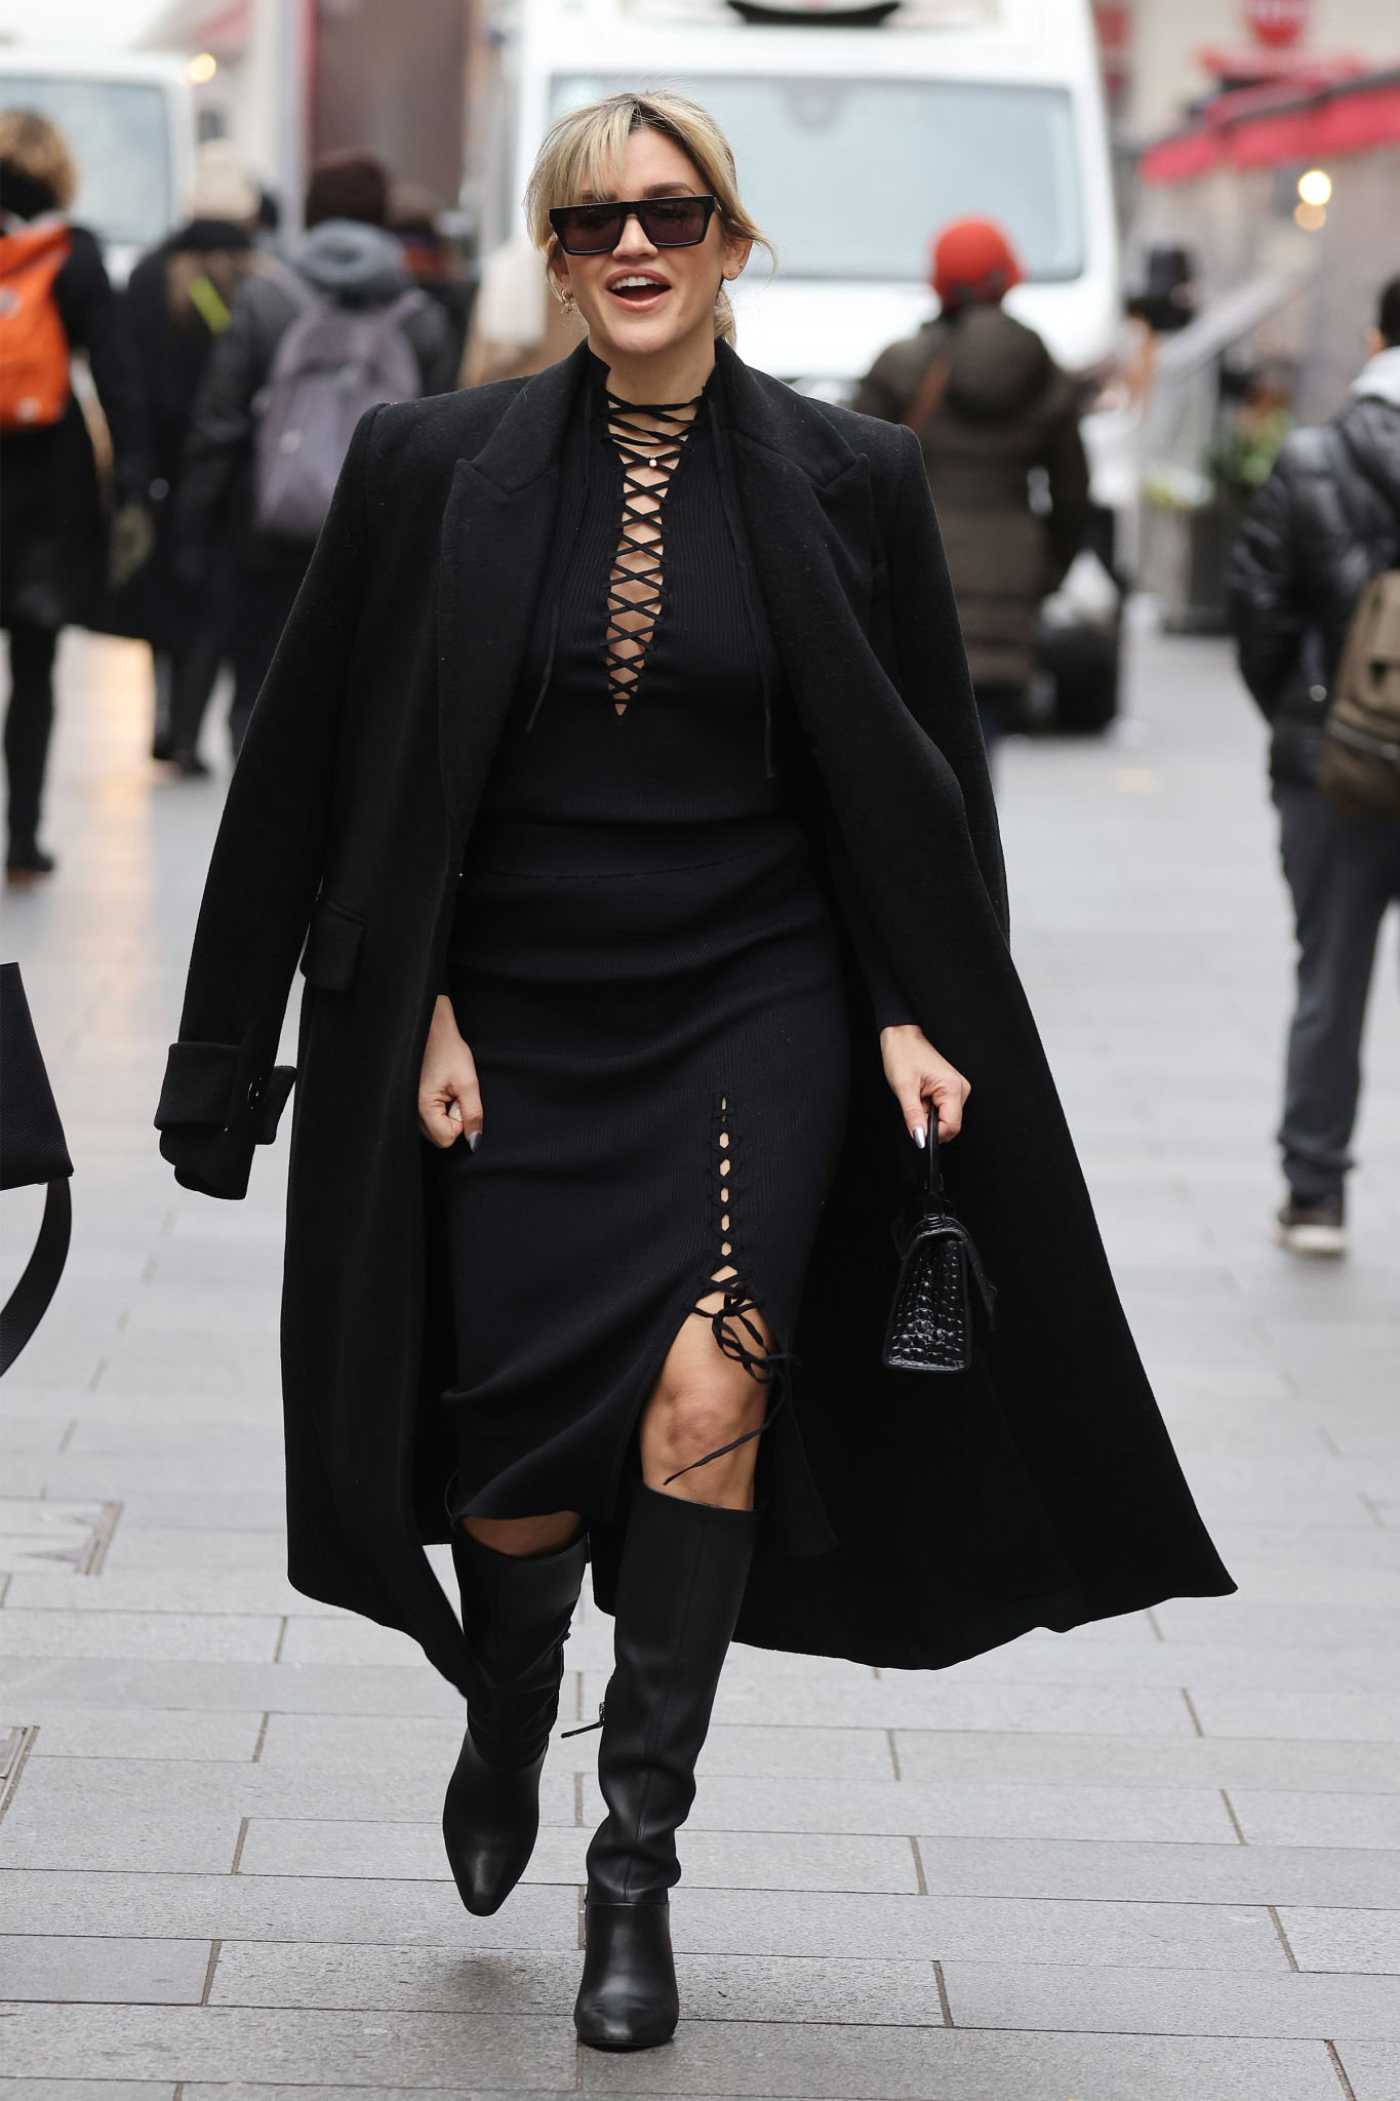 Ashley Roberts in a Black Outfit Leaves the Heart Breakfast Radio Studios in London 12/05/2022